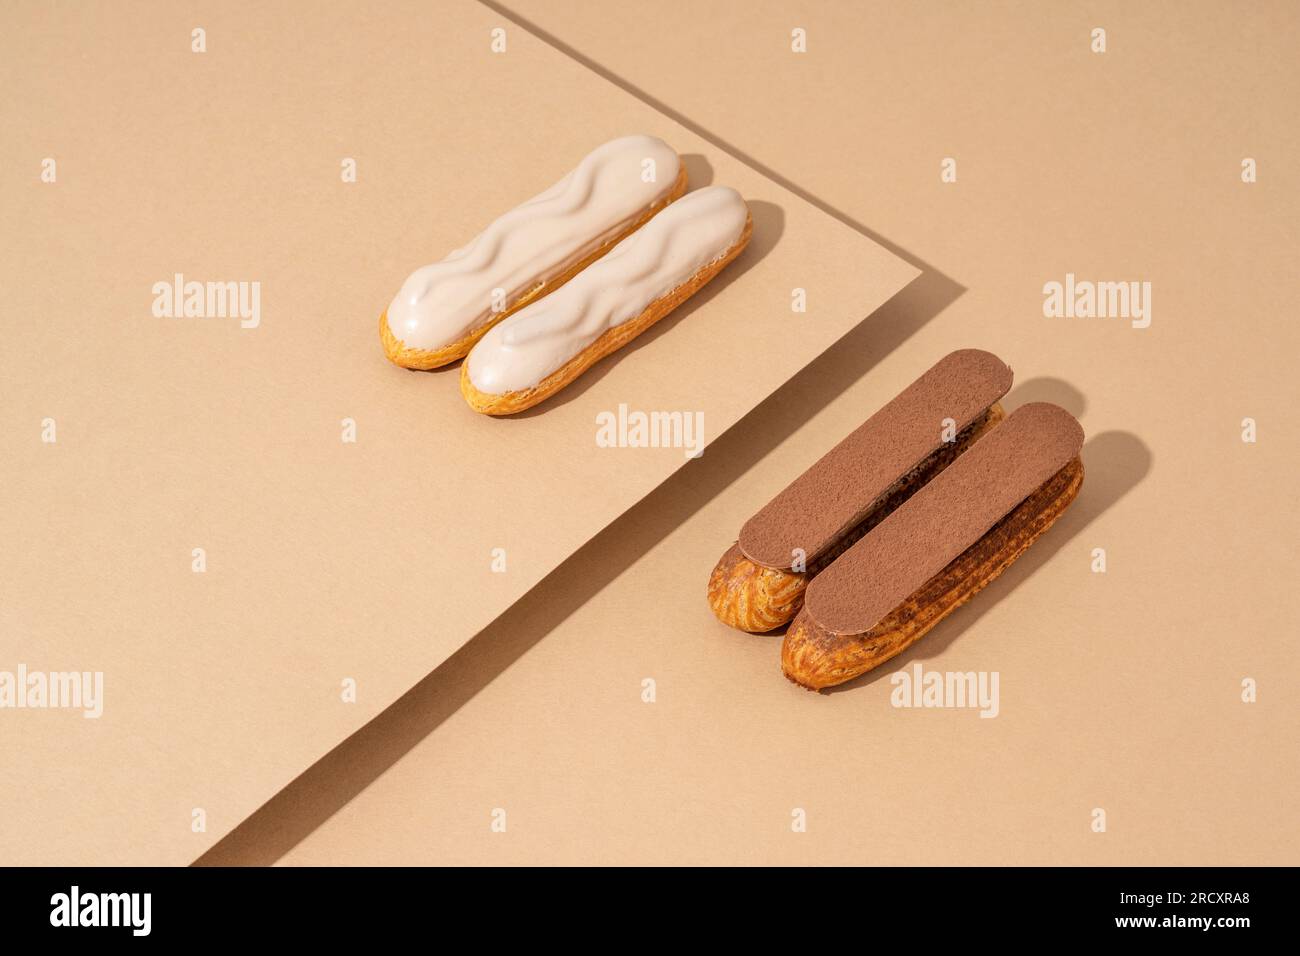 A set of delicious glazed donuts in a variety of flavors, arranged on a cardboard paper in an inviting display Stock Photo